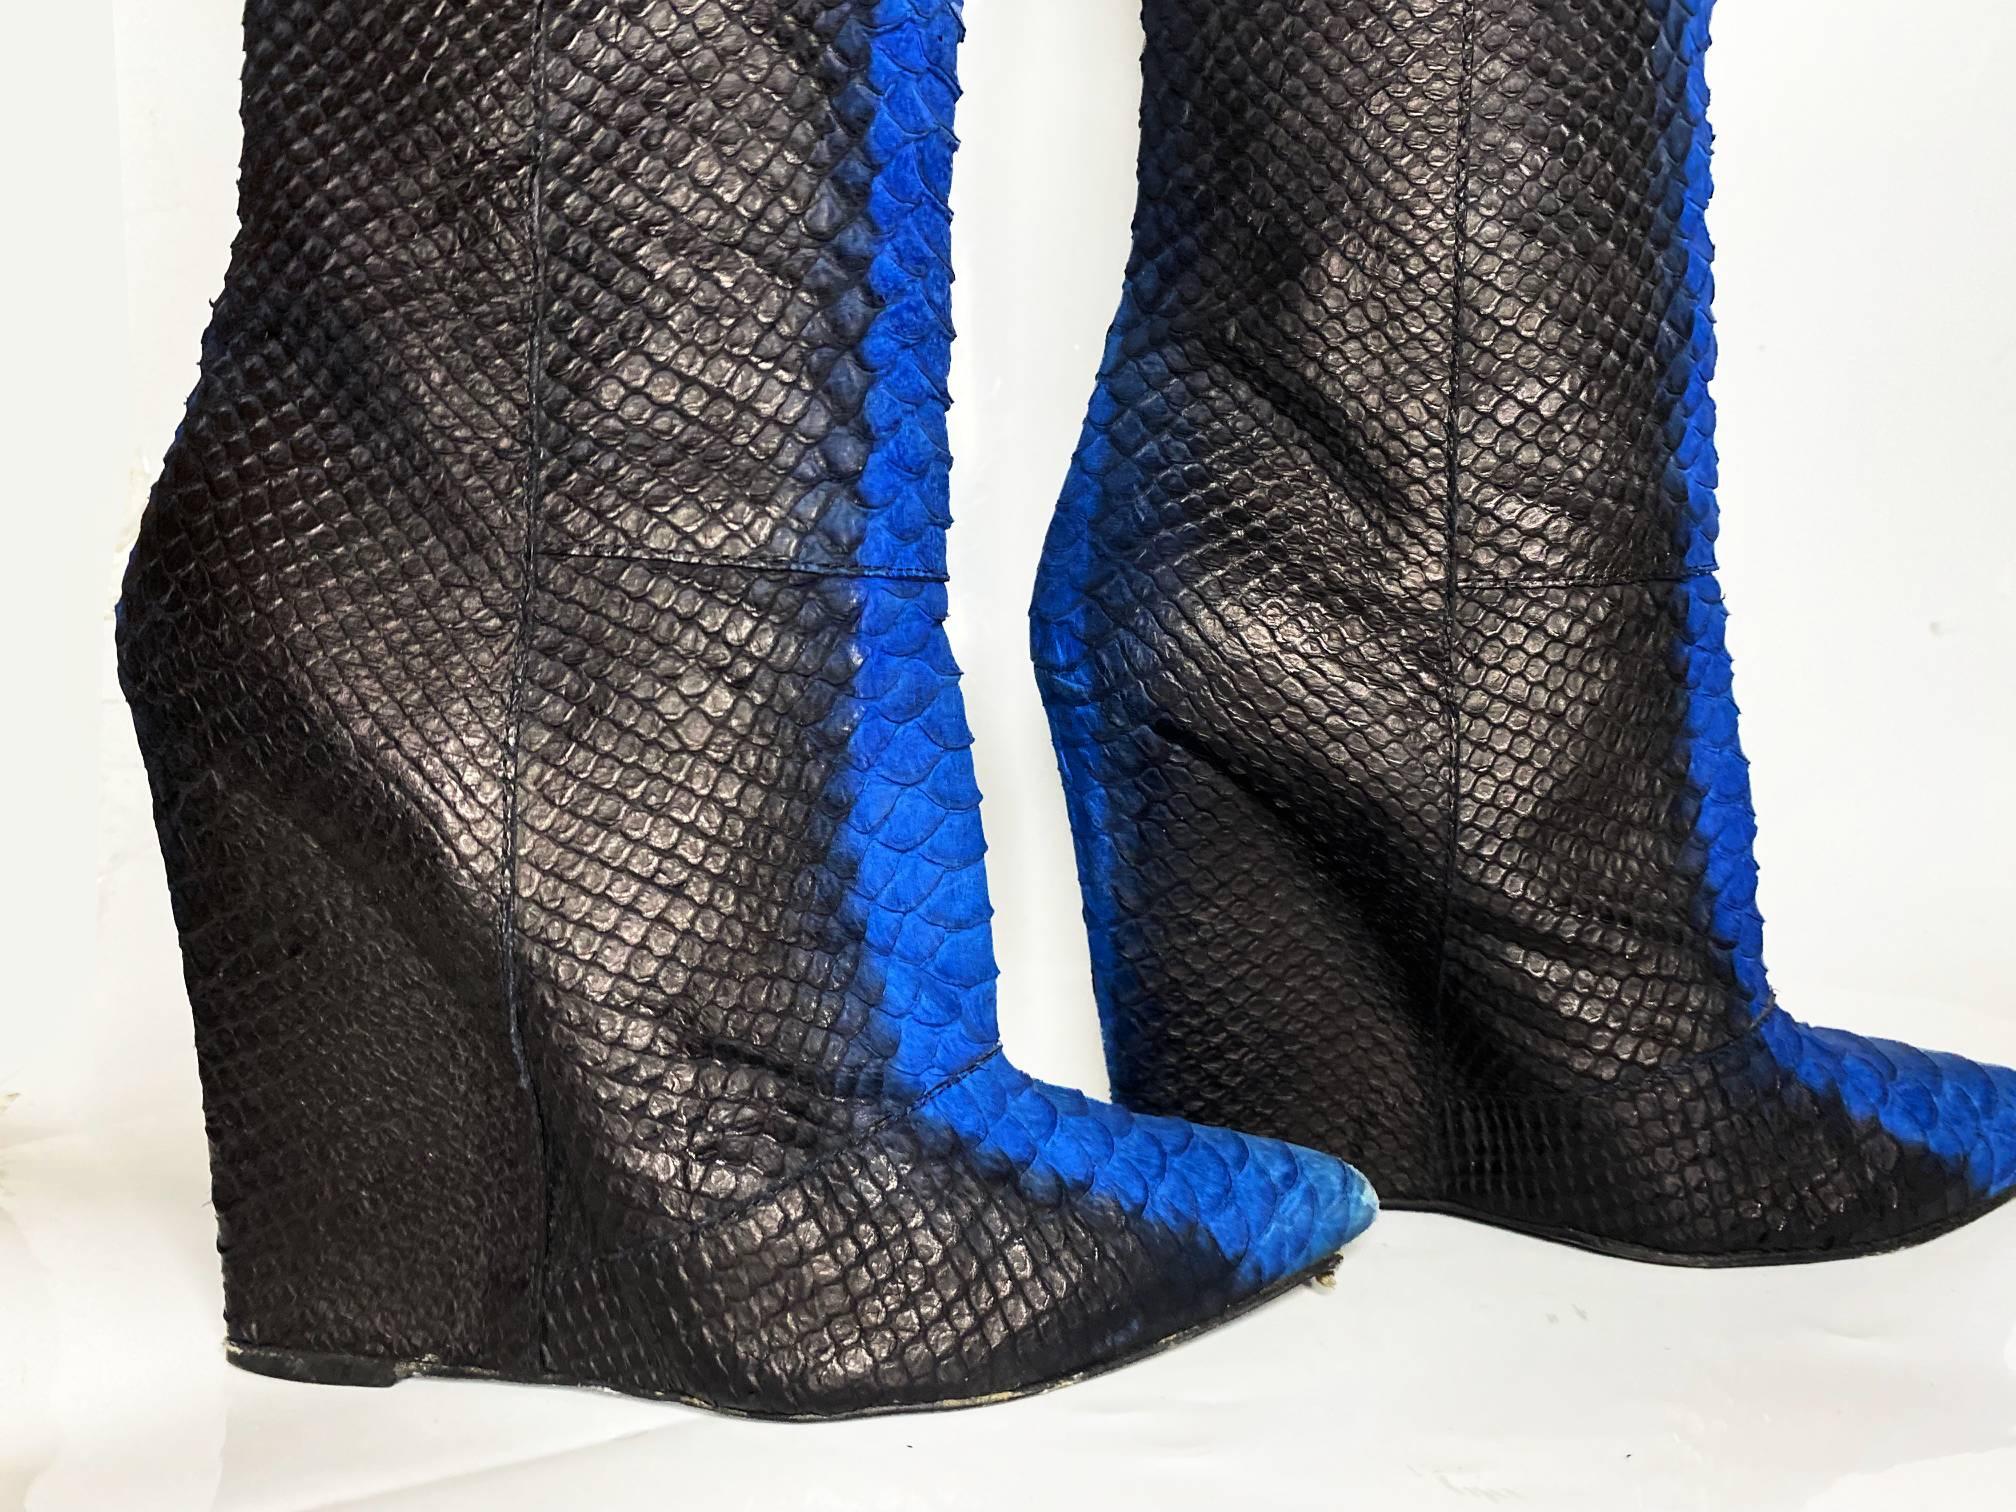  2000s Giuseppe Zanotti Black Blue Platform Faux Snake Skin Calf Boots In Good Condition For Sale In London, GB